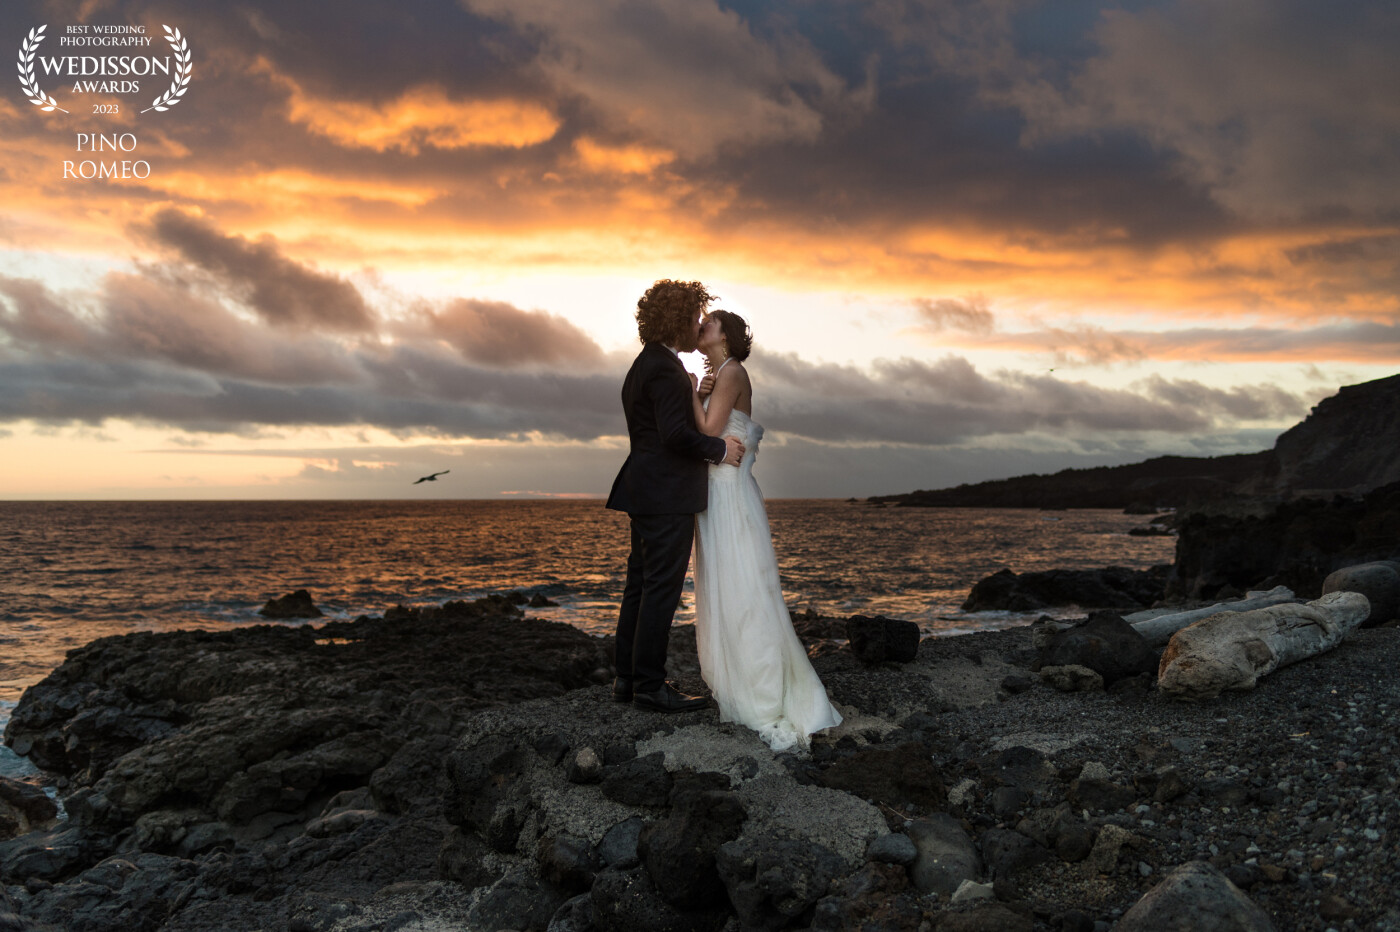 A post wedding portrait session in the setting sun over the Atlantic Ocean.  We are at the southernmost point of the beautiful island of La Palma (La Isla Bonita), Canary Islands, Joan and Bastien are enjoying this sweet moment.